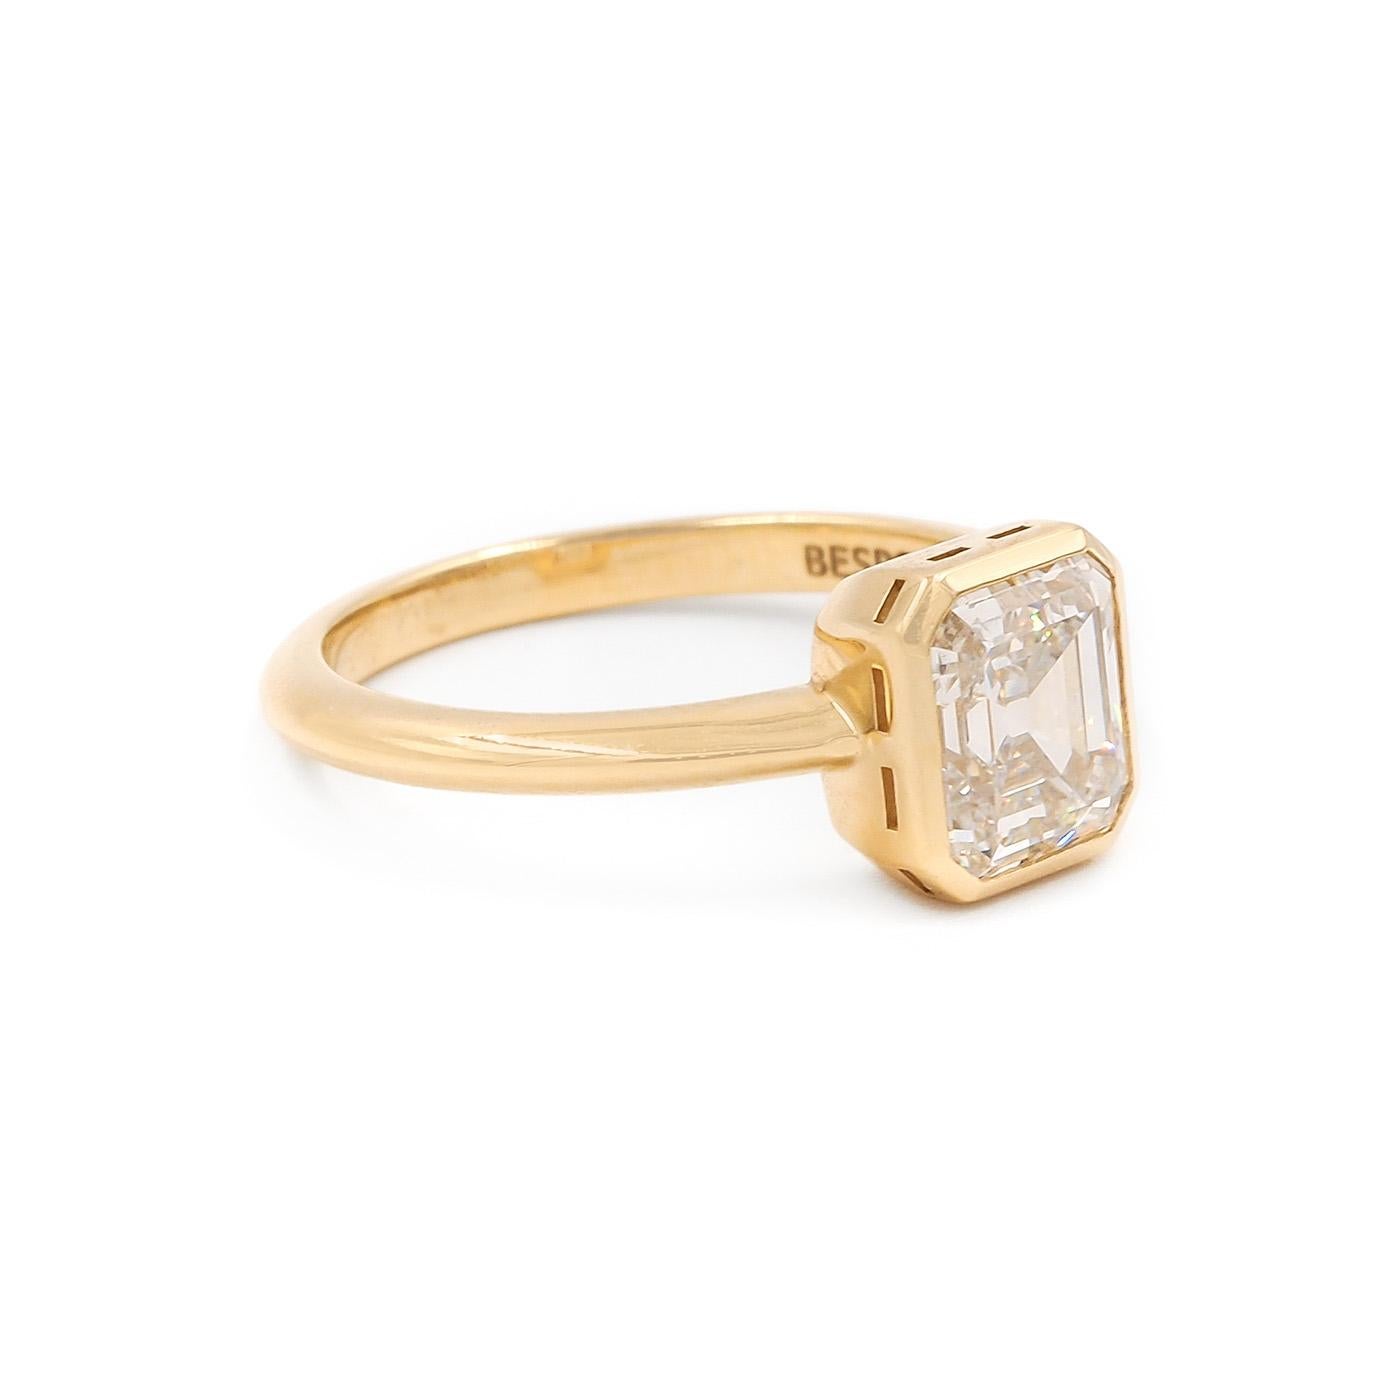 2.09 Carat Emerald Cut Diamond Solitaire Engagement Ring from The Bespoke by Platt Collection, composed of 18k yellow gold. The 2.09 Carat Antique Emerald Cut diamond is GIA certified H color & VS2 clarity. The diamond is set vertically within a